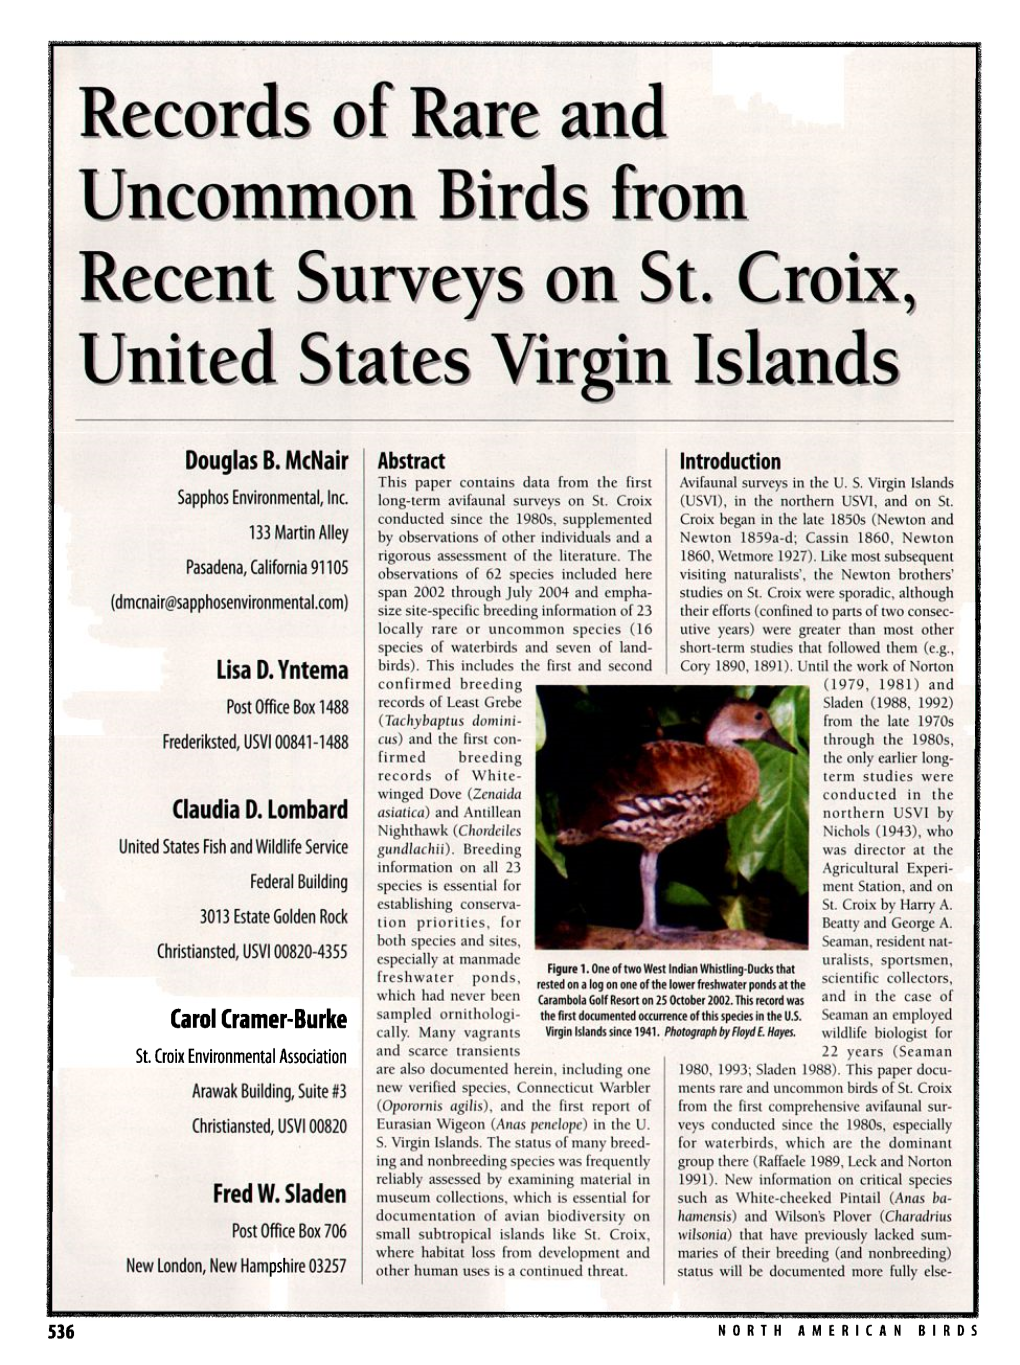 Records of Rare and Uncommon Birds from Recent Surveys on St. Croix